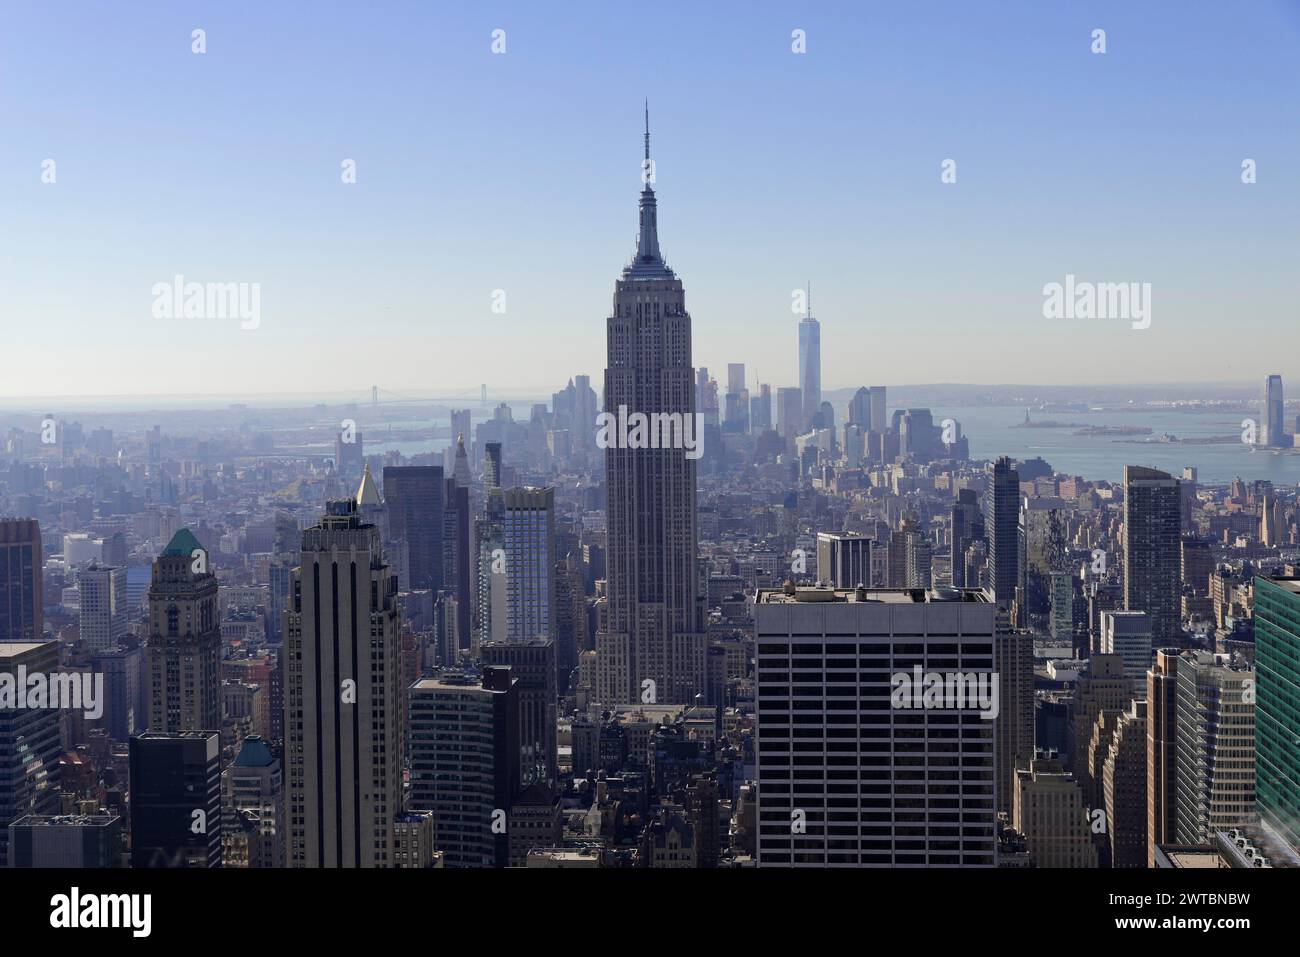 Rockefeller Center observation deck, The Empire State Building towers over the silhouette of Manhattan, Manhattan, New York City, New York, USA Stock Photo